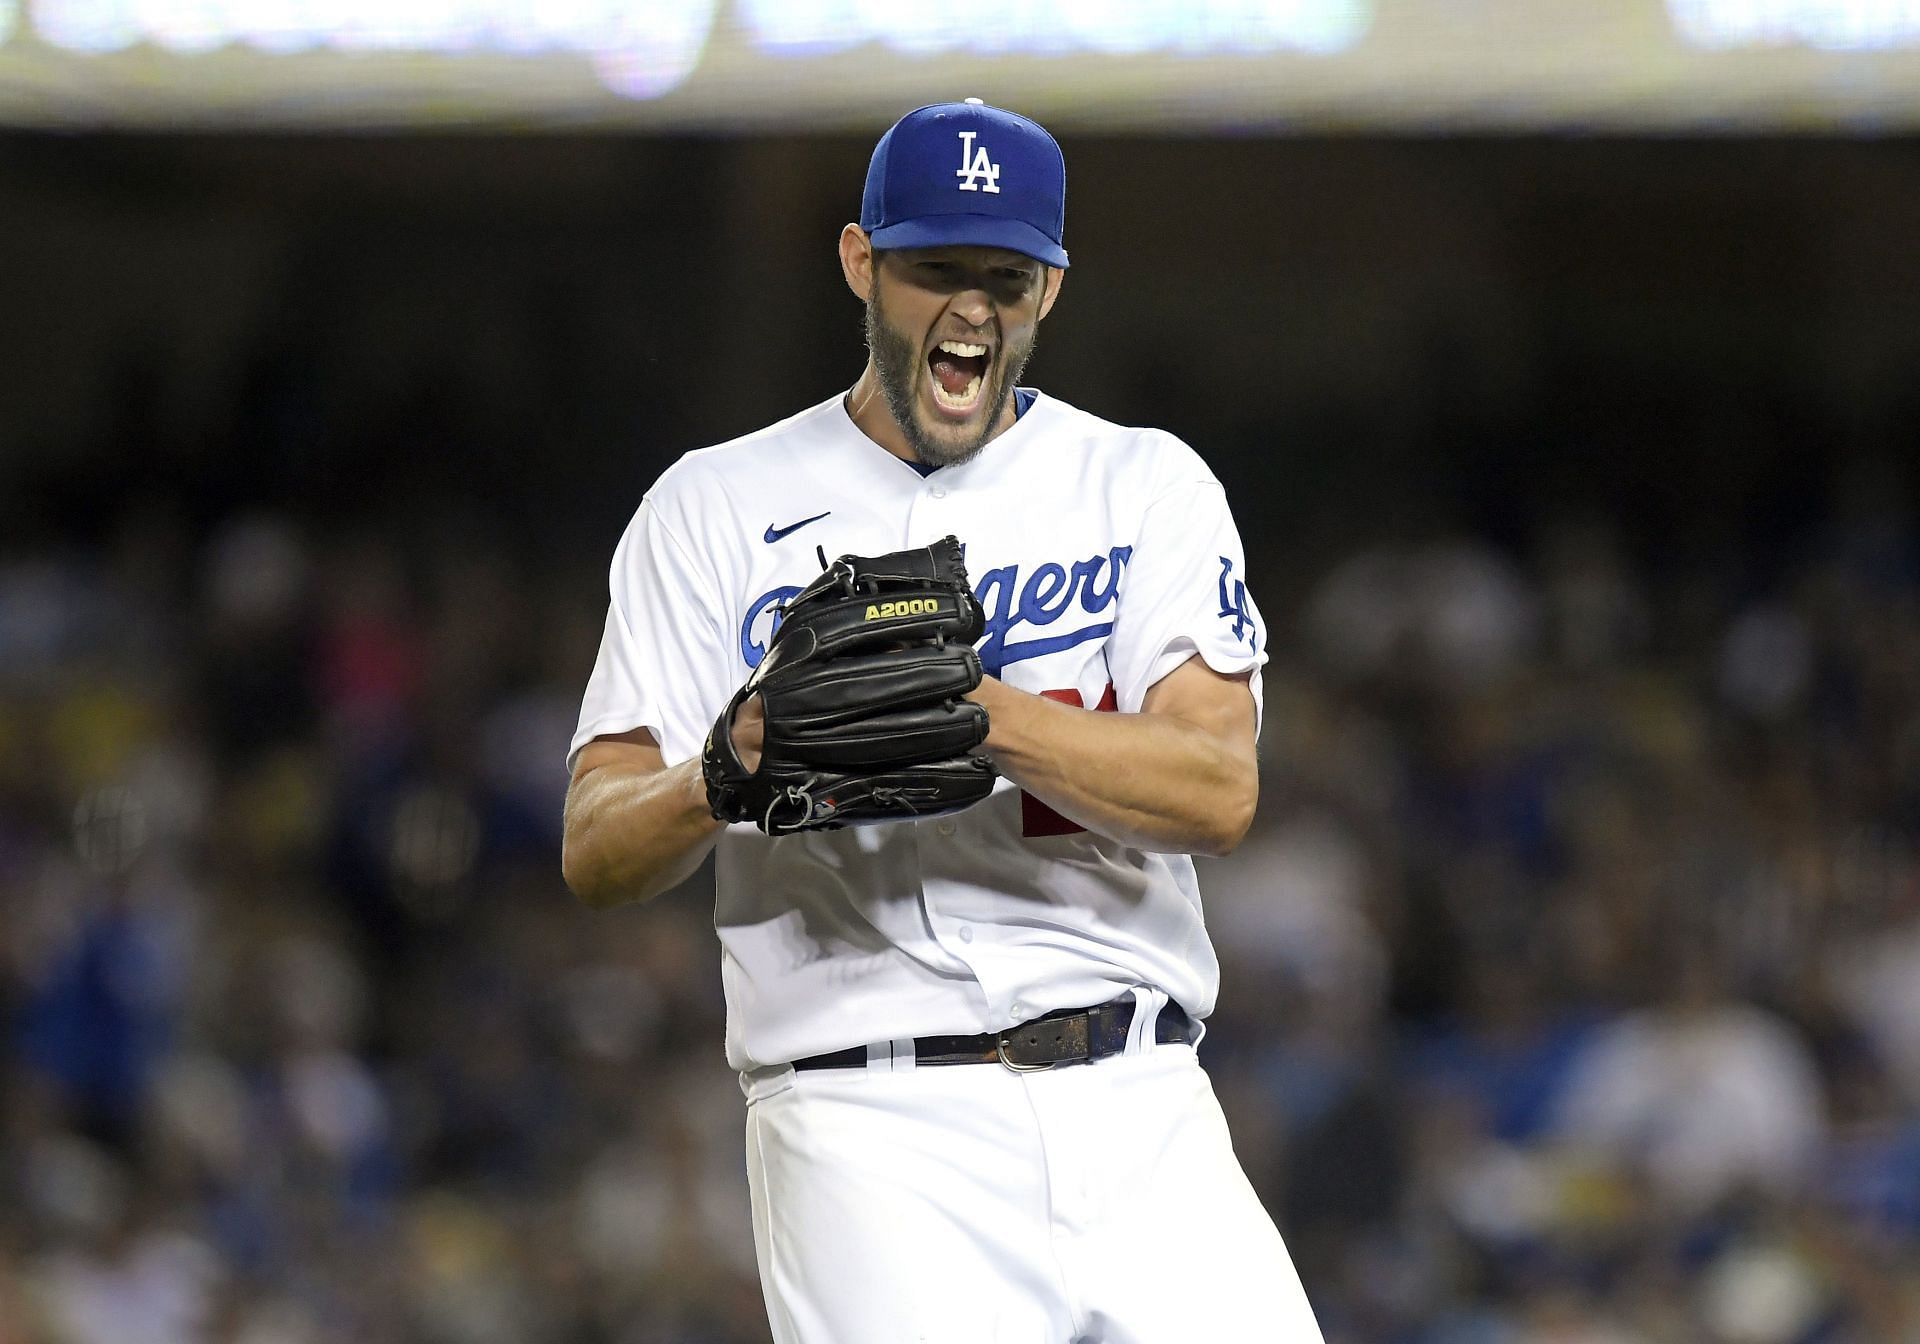 Dodgers ace Clayton Kershaw celebrates after a strikeout on April 18 against the Atlanta Braves